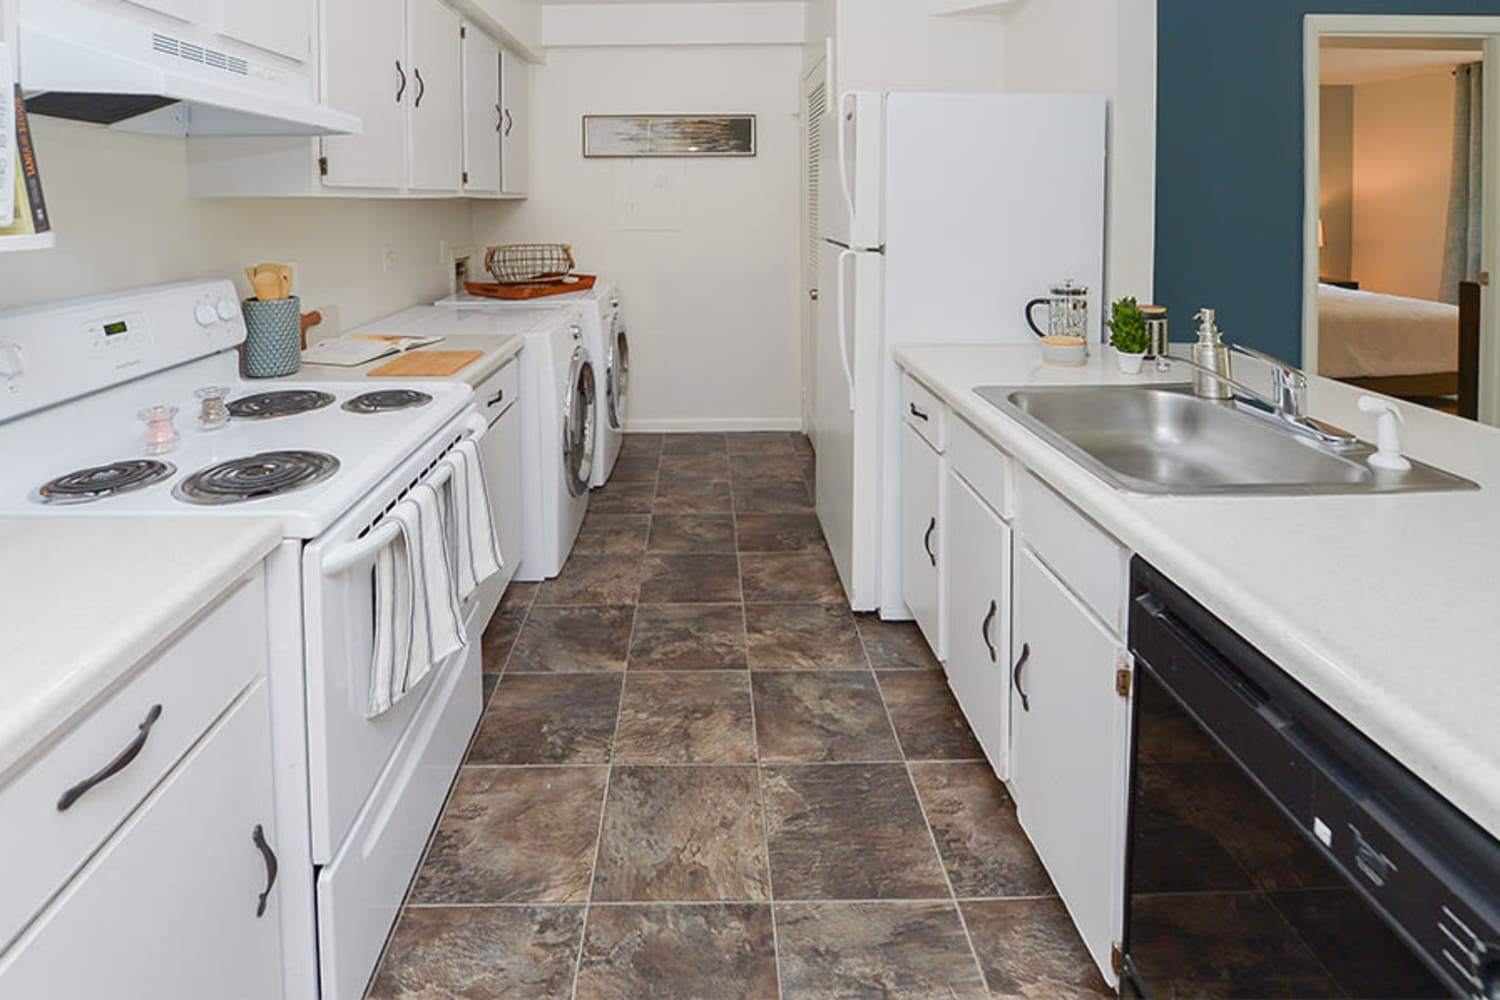 The Landings Apartment Homes in Absecon, New Jersey have well-equipped kitchen